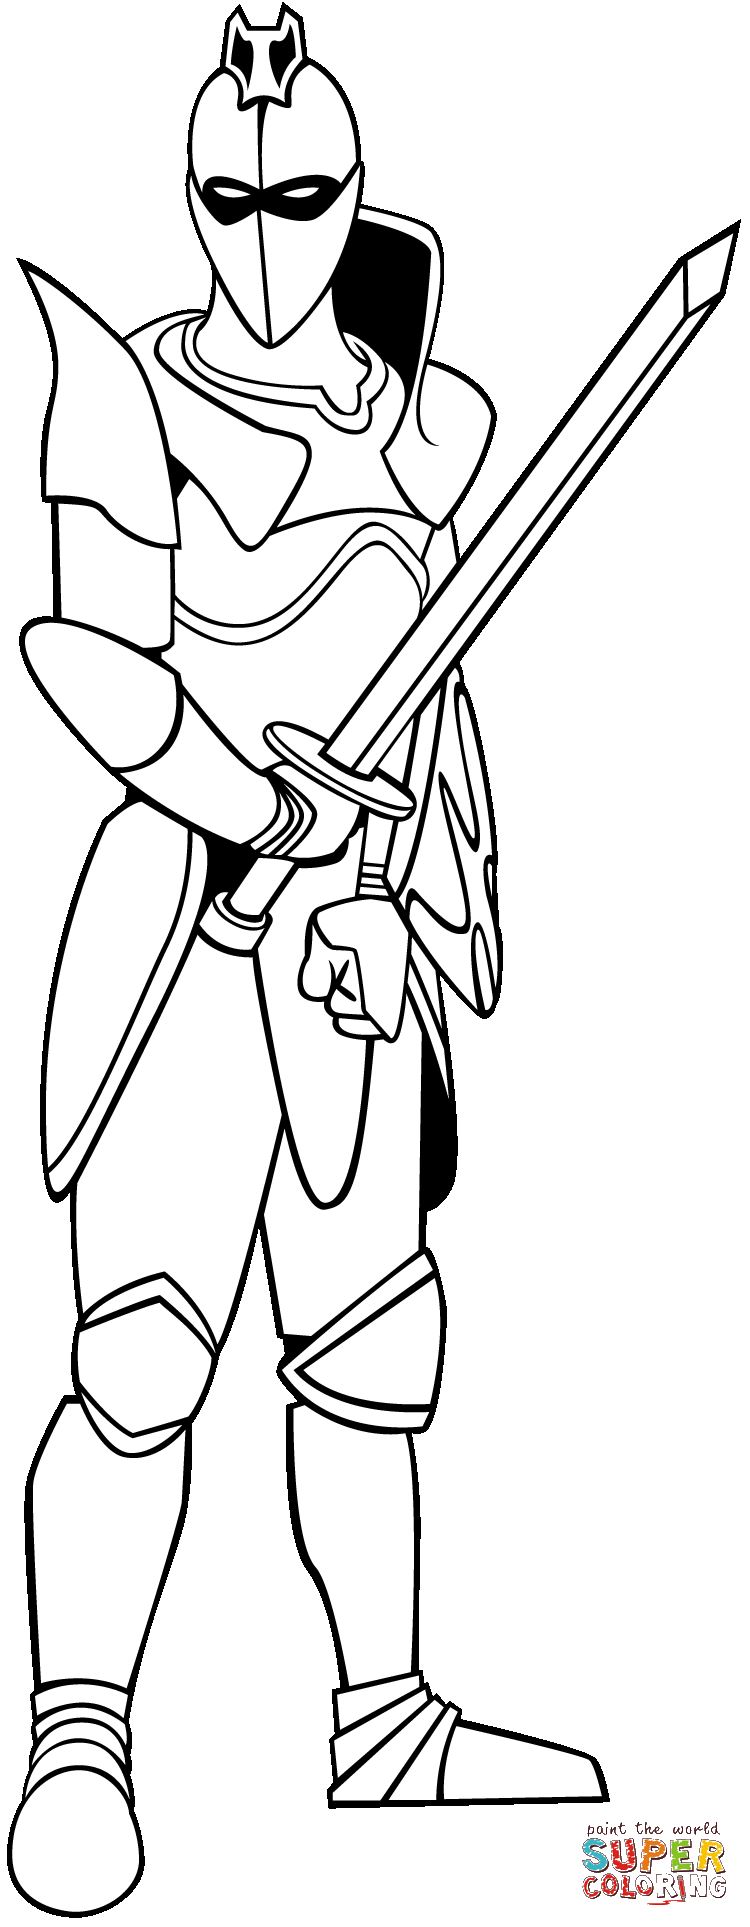 Knight Of Evil coloring page | Free Printable Coloring Pages